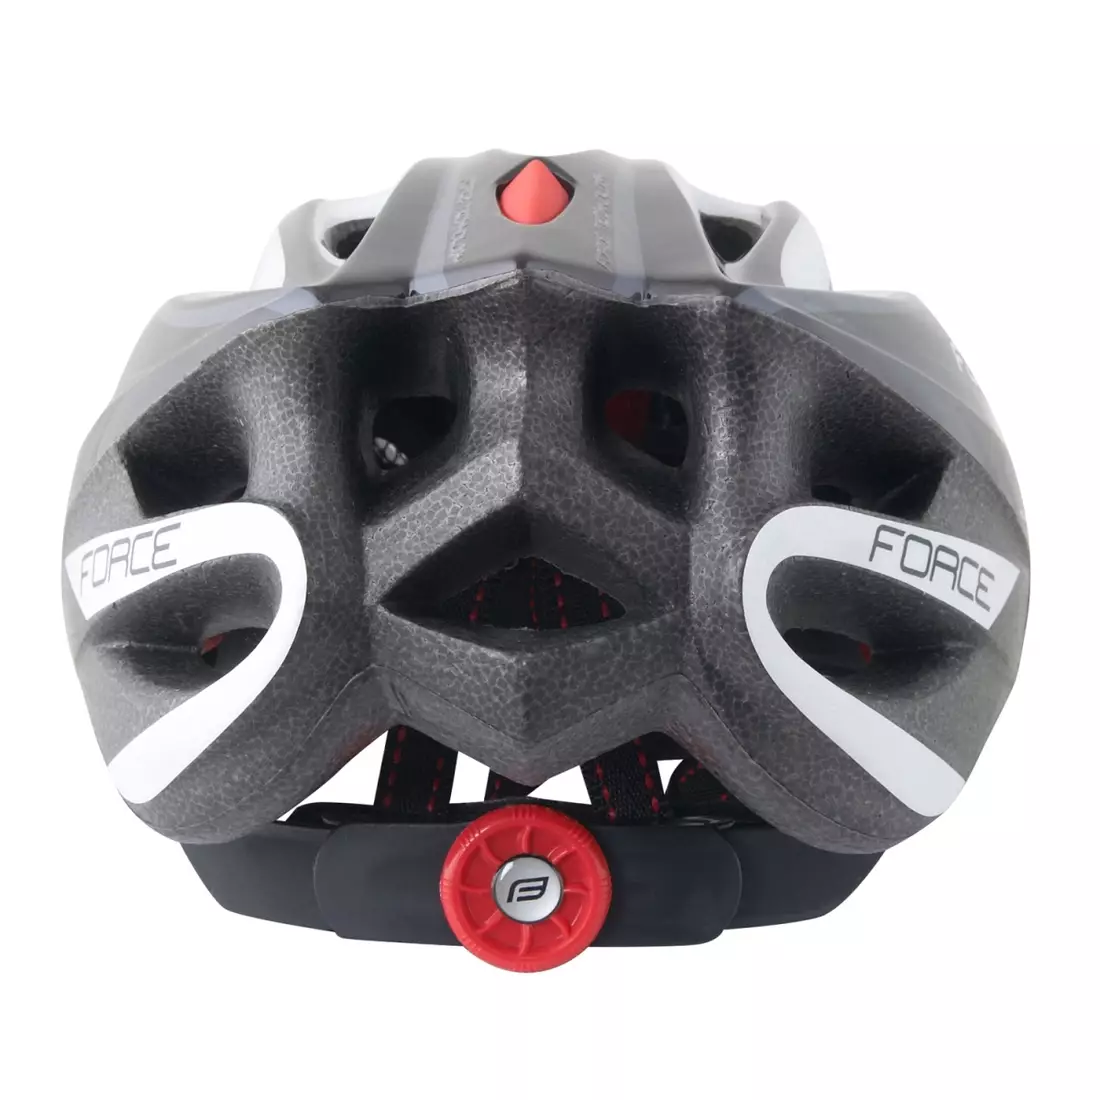 FORCE TERY bicycle helmet white, black and red 902729/30